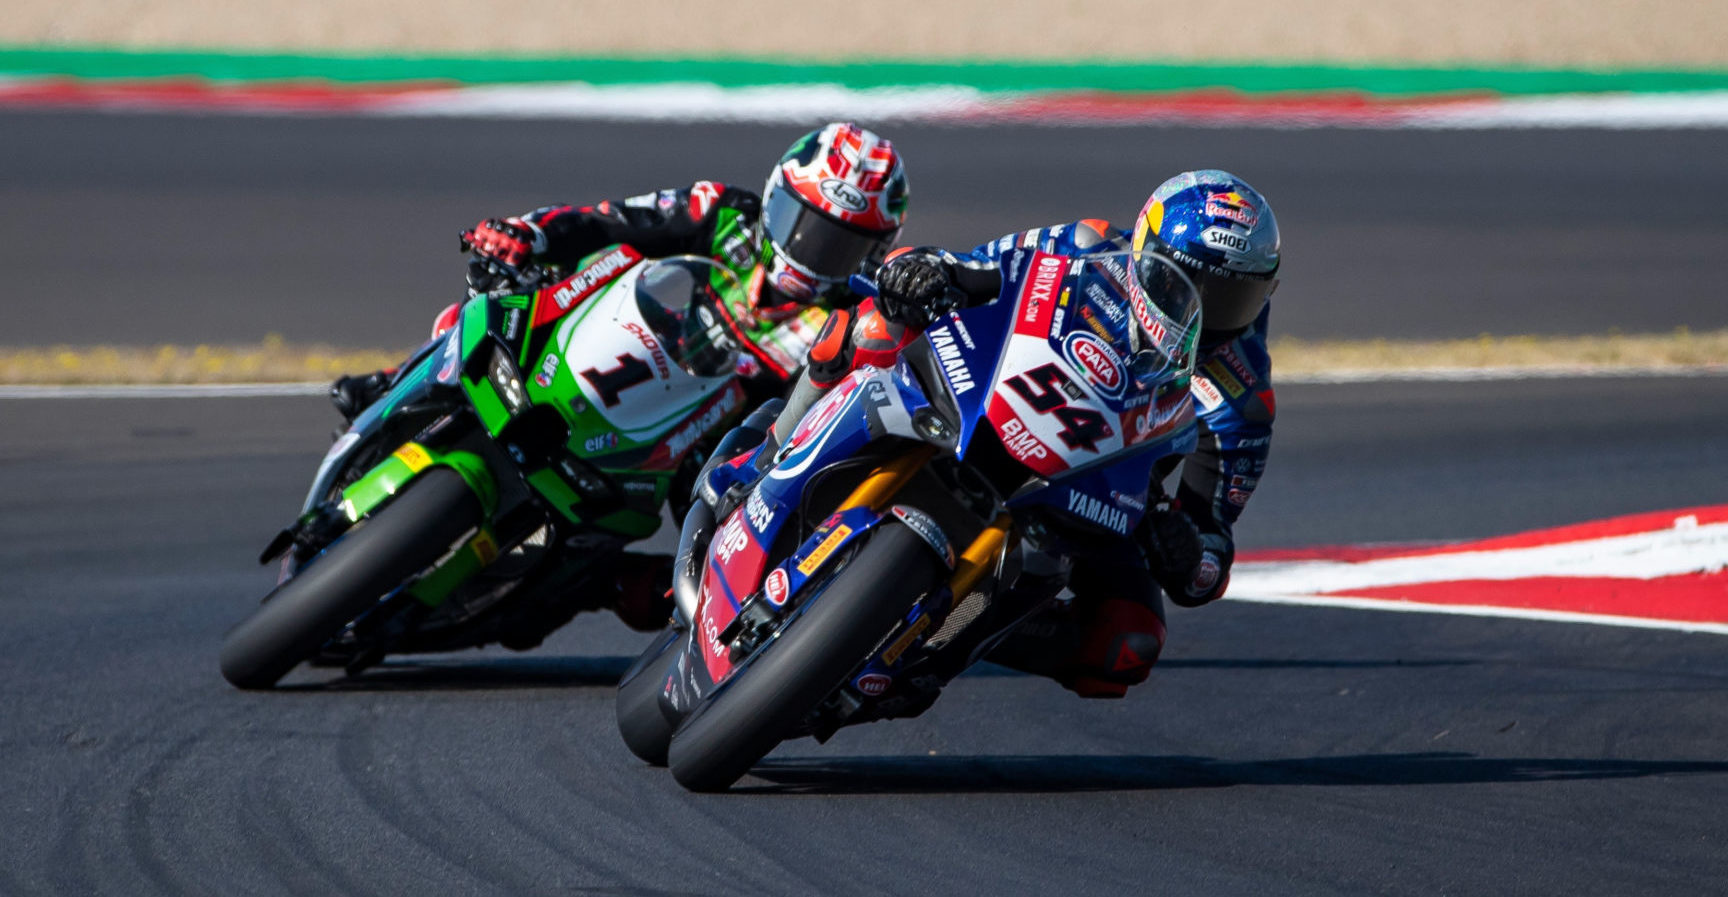 Toprak Razgatlioglu (54) leads Jonathan Rea (1) by 30 points in the FIM Superbike World Championship with 62 points up for grabs at the season finale in Indonesia. Photo courtesy Yamaha.